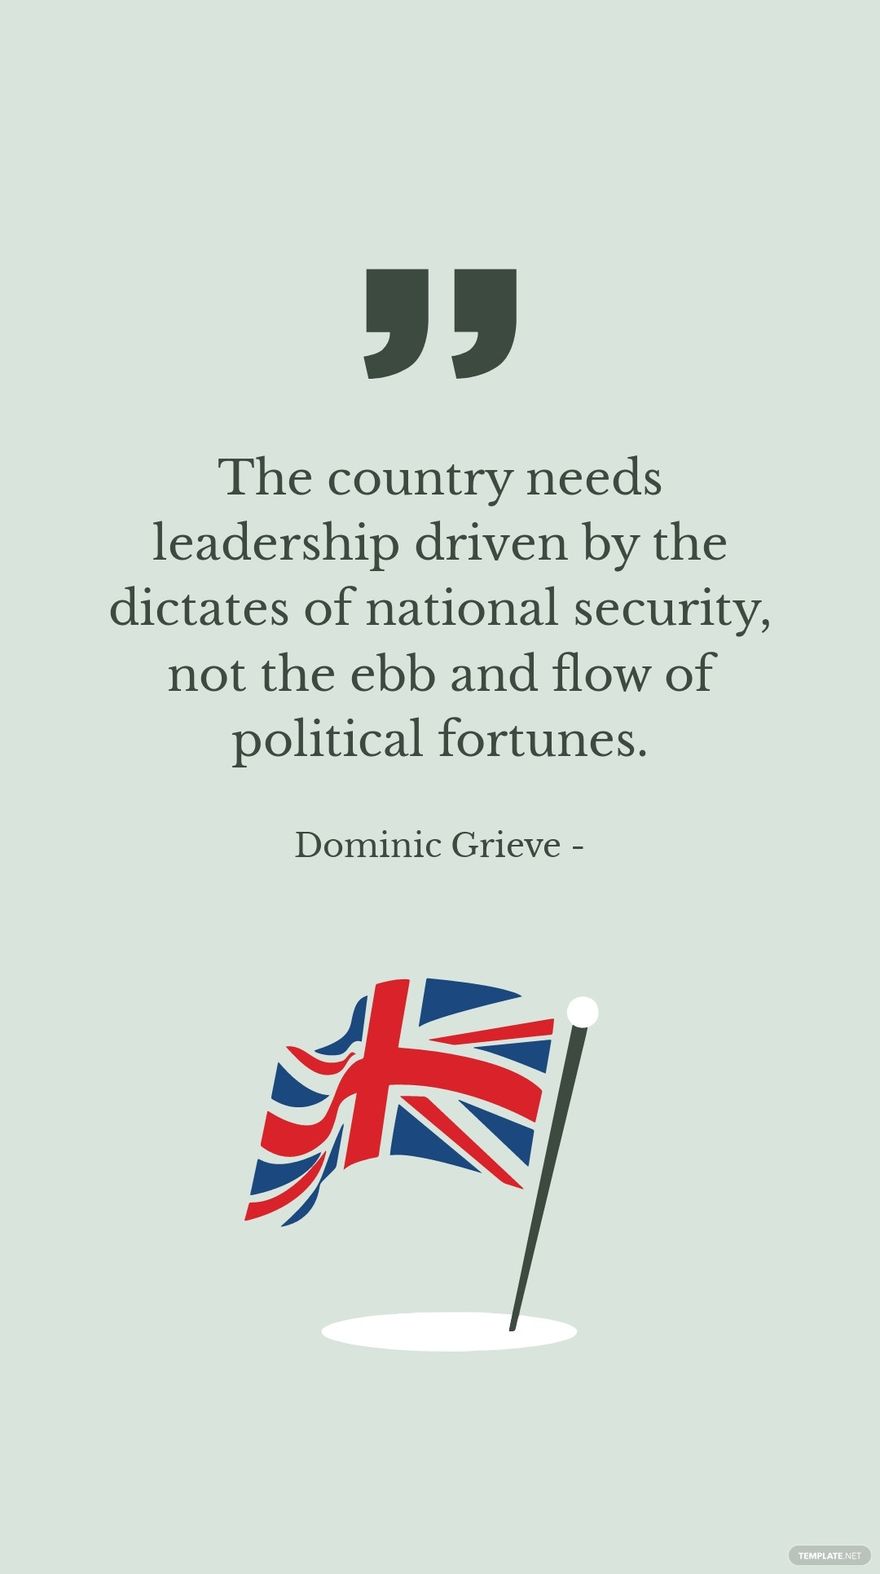 Free Dominic Grieve - The country needs leadership driven by the dictates of national security, not the ebb and flow of political fortunes. in JPG